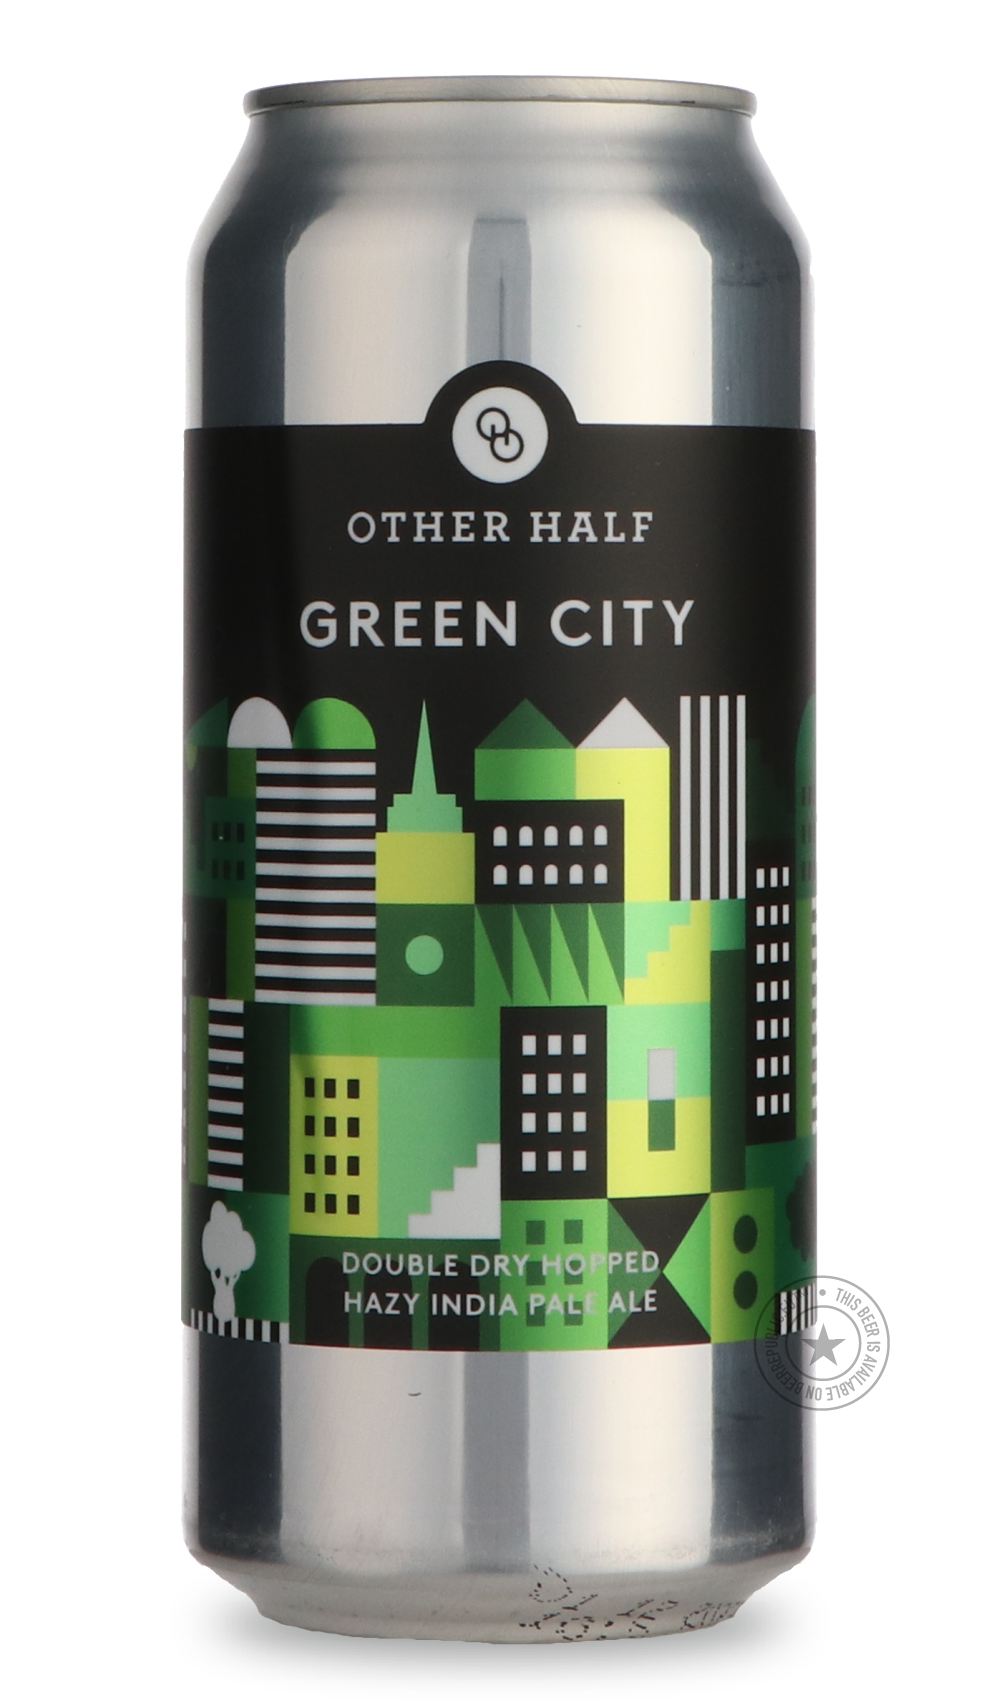 -Other Half- Green City-IPA- Only @ Beer Republic - The best online beer store for American & Canadian craft beer - Buy beer online from the USA and Canada - Bier online kopen - Amerikaans bier kopen - Craft beer store - Craft beer kopen - Amerikanisch bier kaufen - Bier online kaufen - Acheter biere online - IPA - Stout - Porter - New England IPA - Hazy IPA - Imperial Stout - Barrel Aged - Barrel Aged Imperial Stout - Brown - Dark beer - Blond - Blonde - Pilsner - Lager - Wheat - Weizen - Amber - Barley Wi